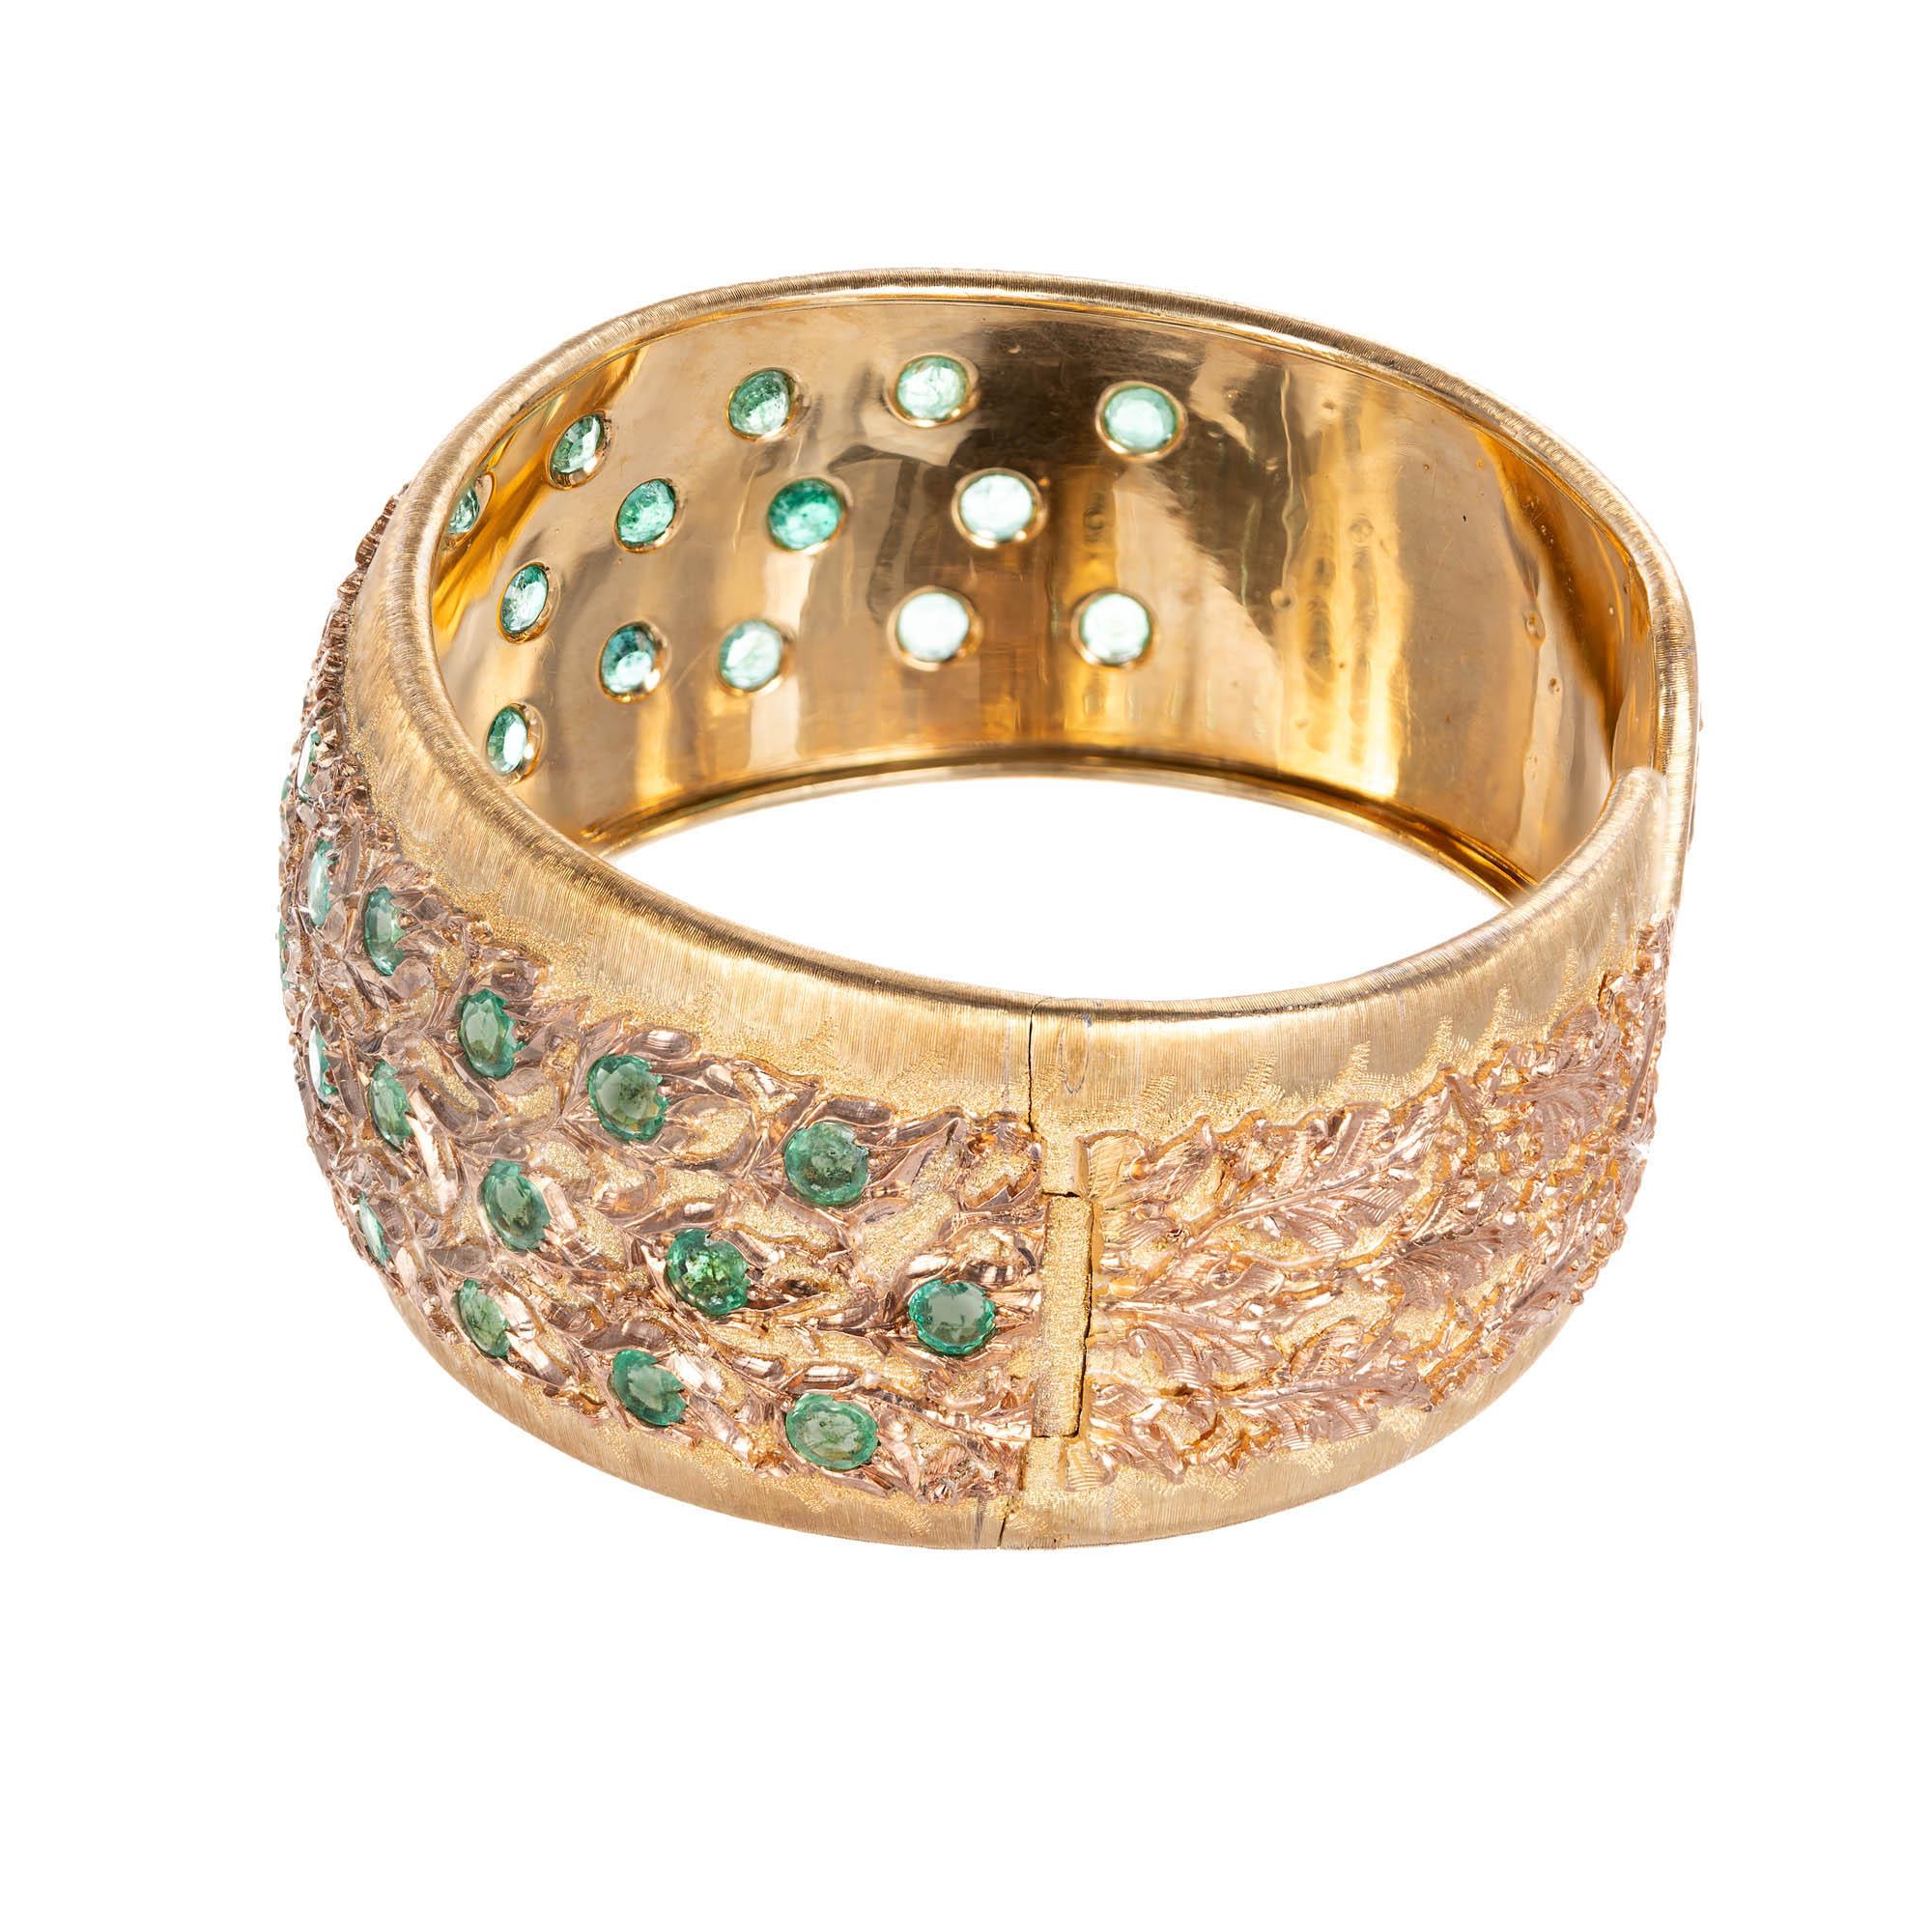 1940's emerald Cuff Bracelet in 18k yellow and rose gold by Buccellati. 39 Round emeralds 4.16cts. Authenticated and appraised by Buccellati  . Marked Buccellati taly 750. 

39 round green emeralds, Approximate 4.16 Carats 
18k yellow Gold
18k Rose